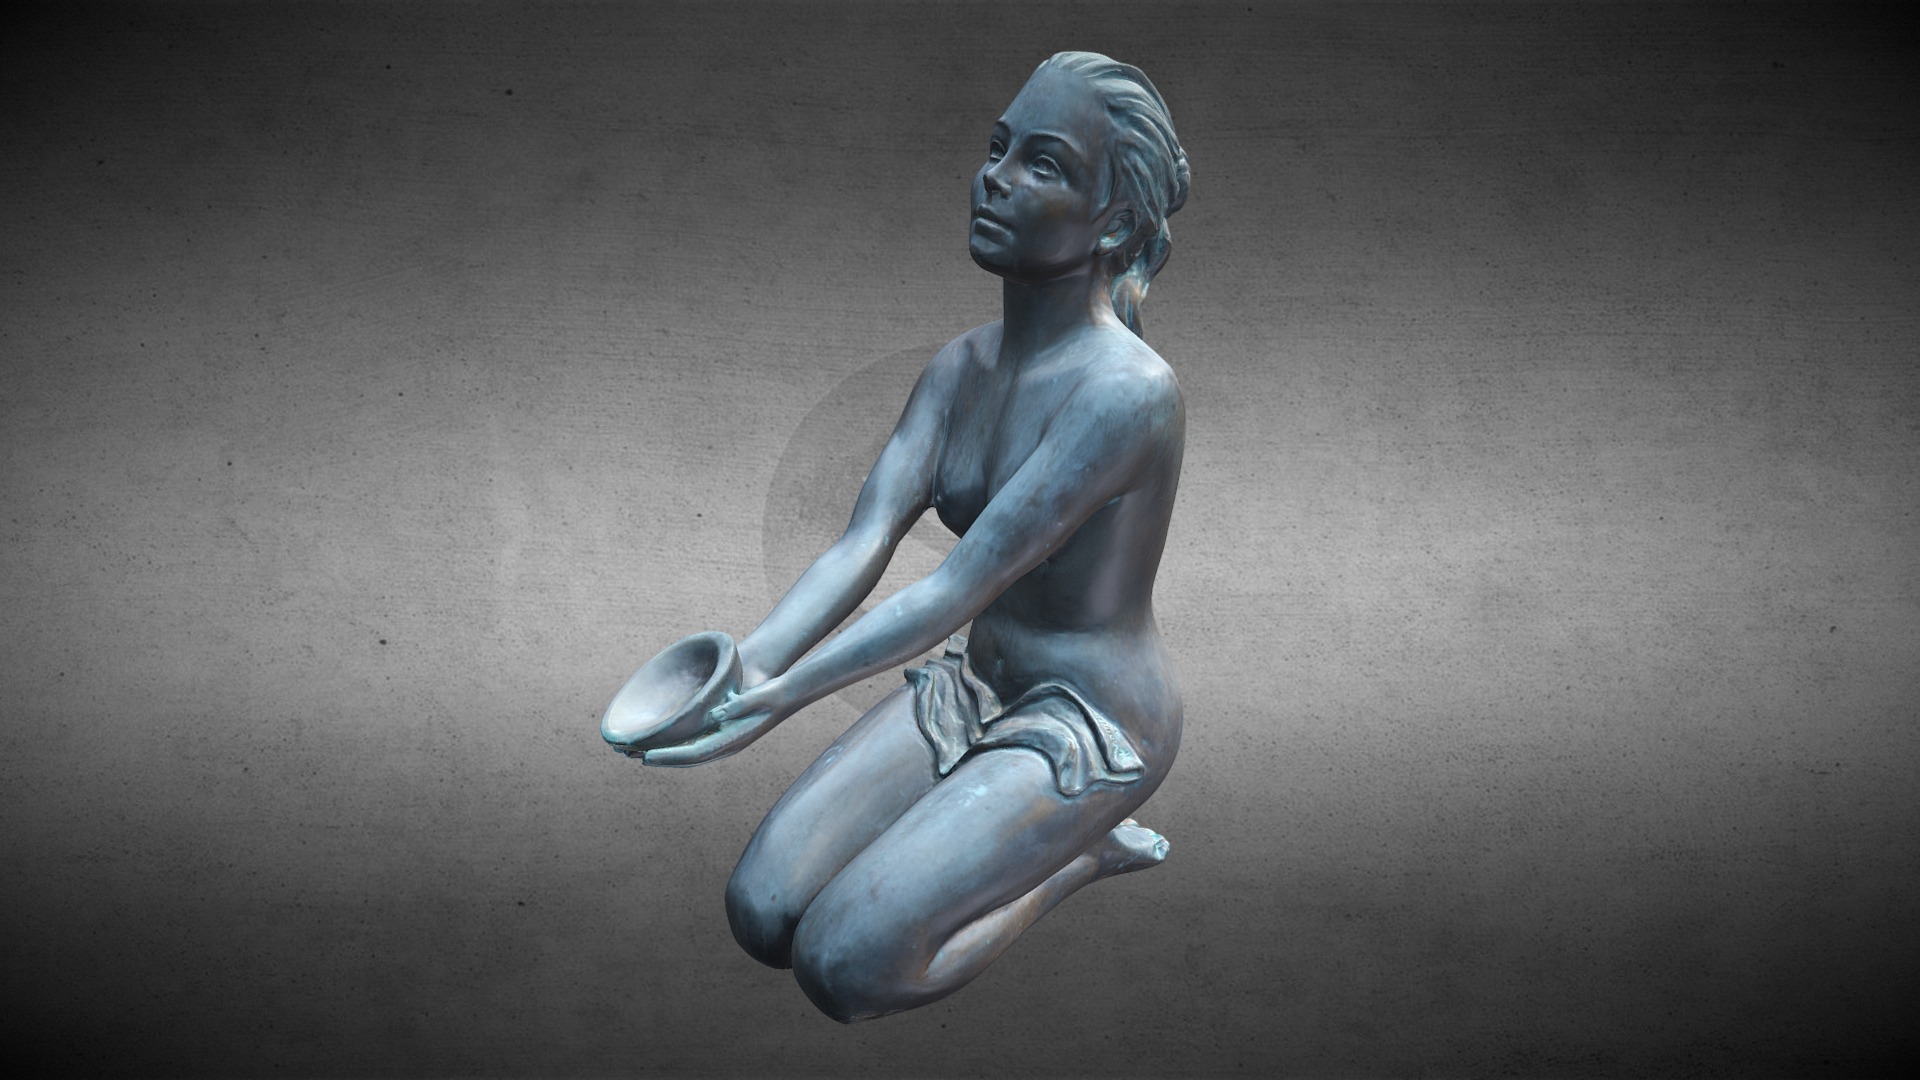 High detail 3D scan of a bronze statue of a sitting girl.

Water tight - can be used for 3D printing

Used technology:




GOM Atos III triple scanner with a 700MV for the geometry

Photogrammetry for the colors
 - High detail 3D scan - bronze statue of a girl - 3D model by TetraVision 3d model